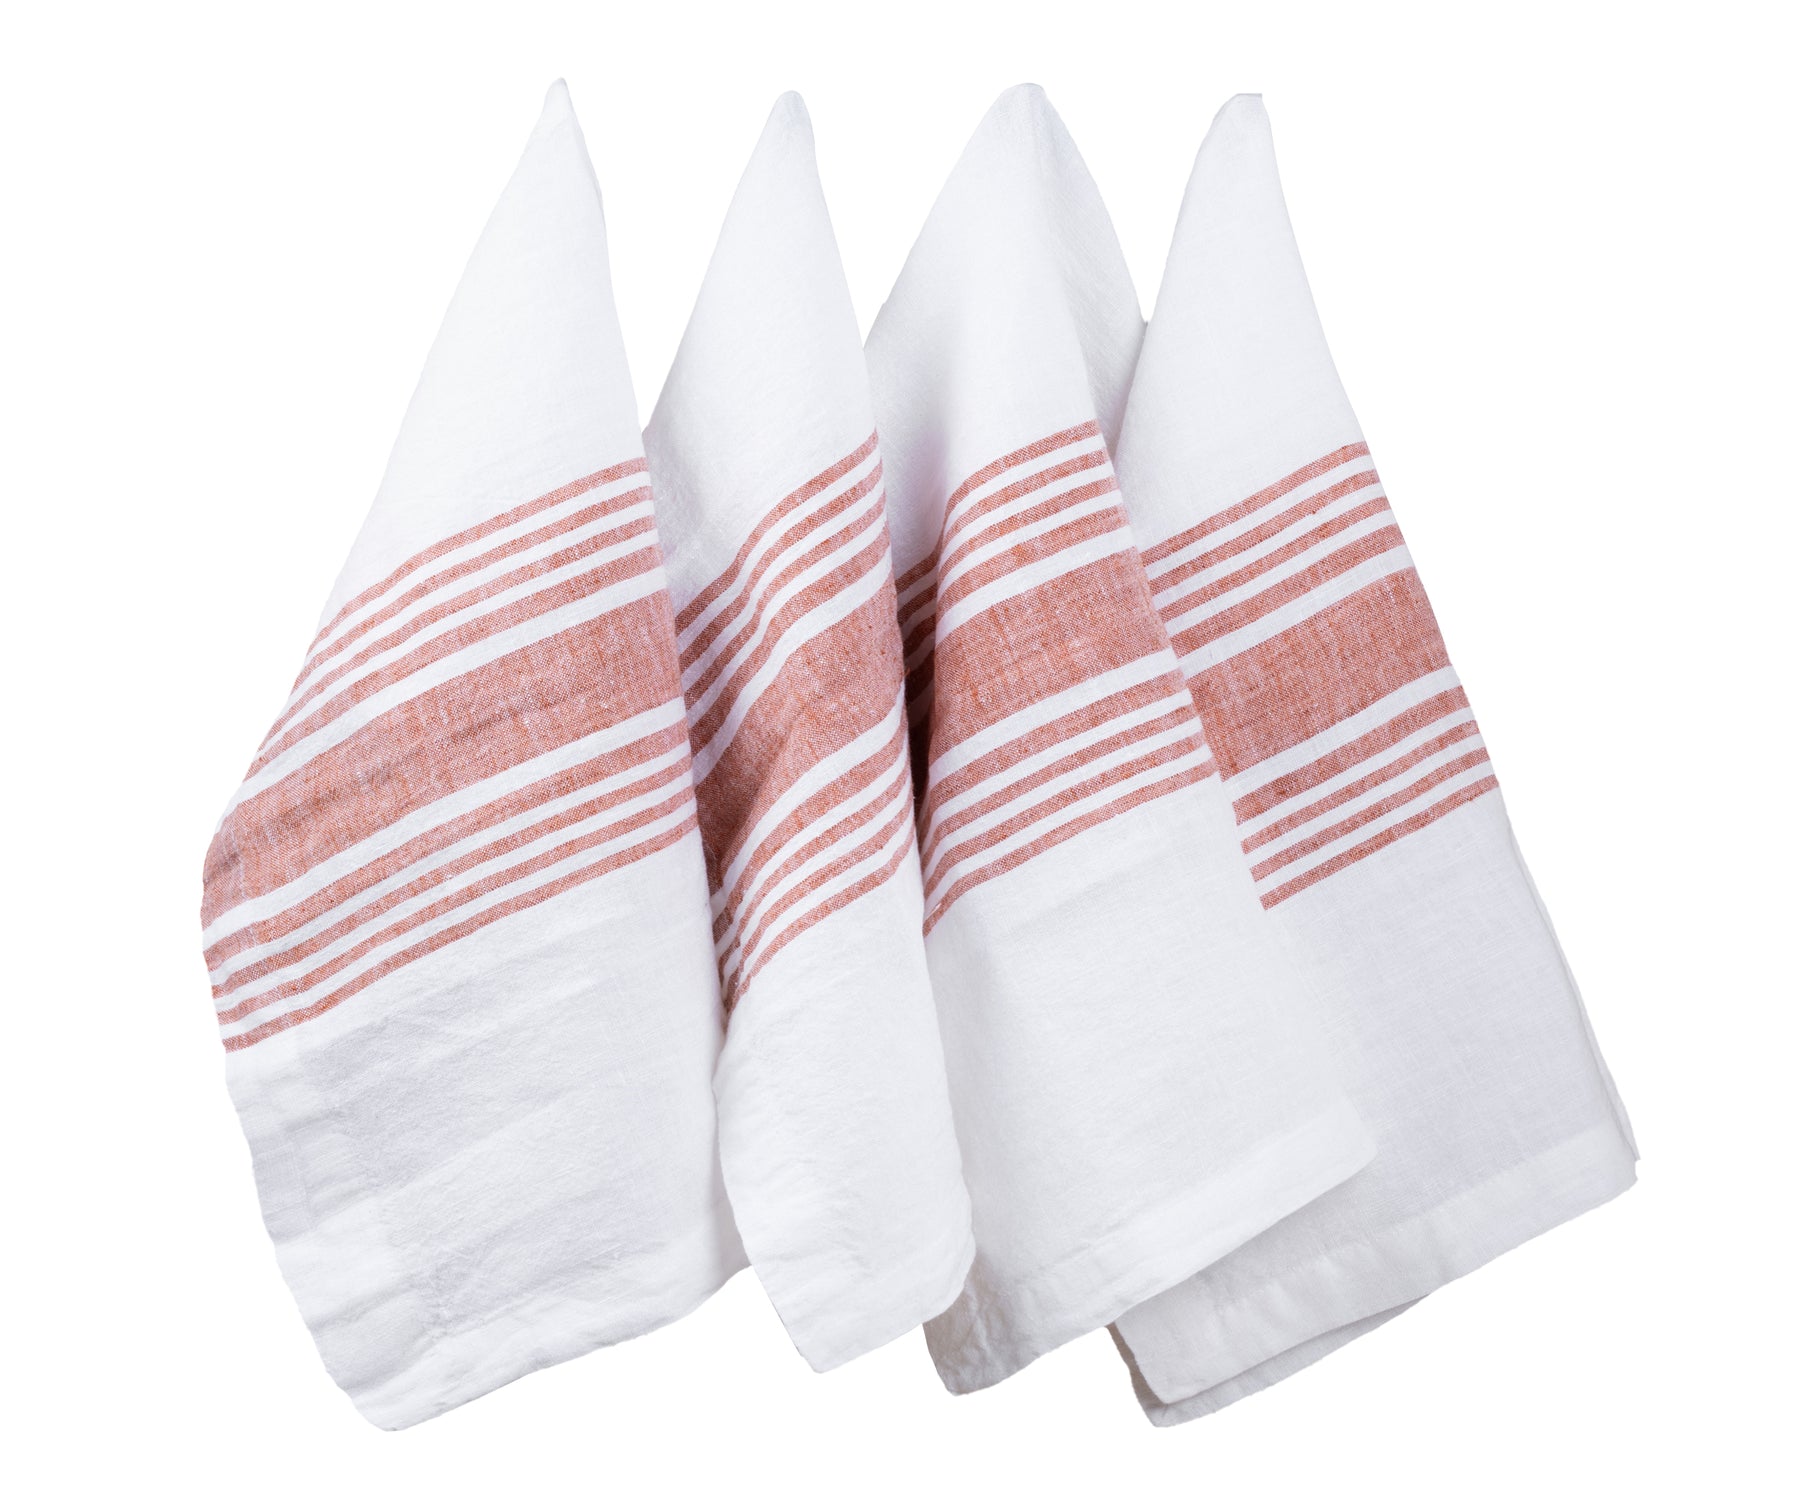 Three linen dinner napkins with red and white stripes against a white backdrop